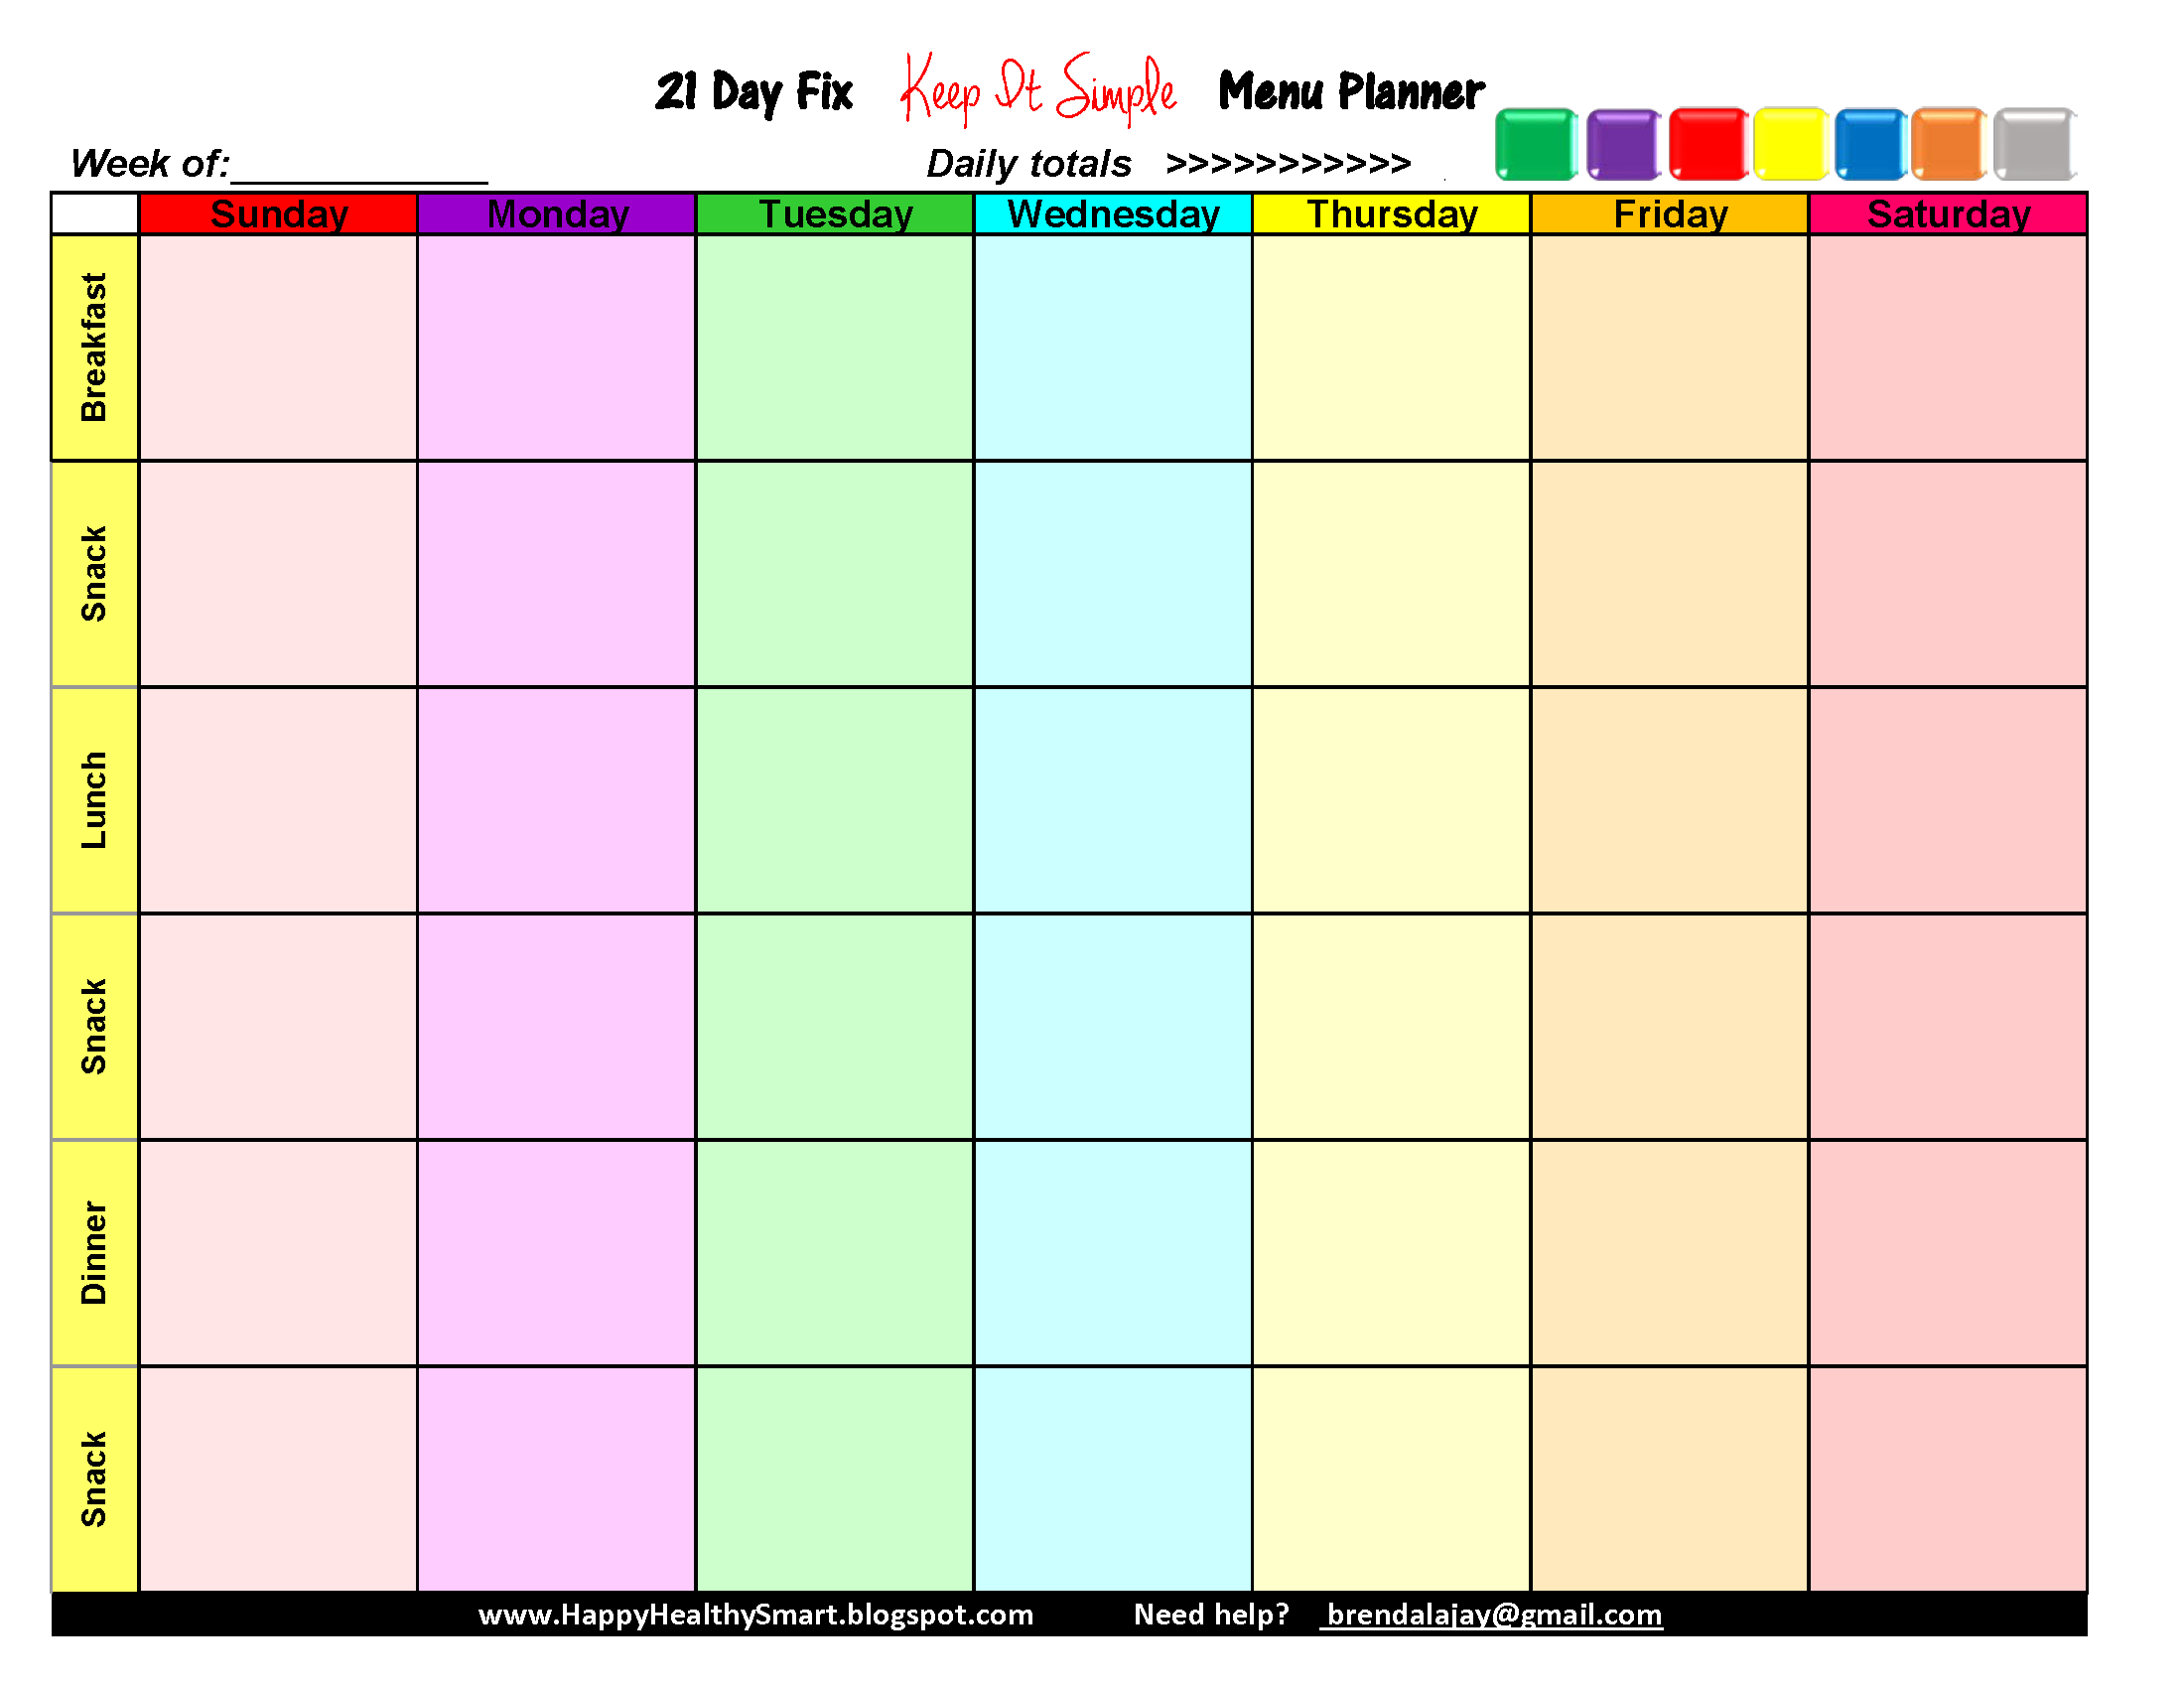 Free Printable 21 Day Fix Meal Planning Sheets : My Crazy Good Life